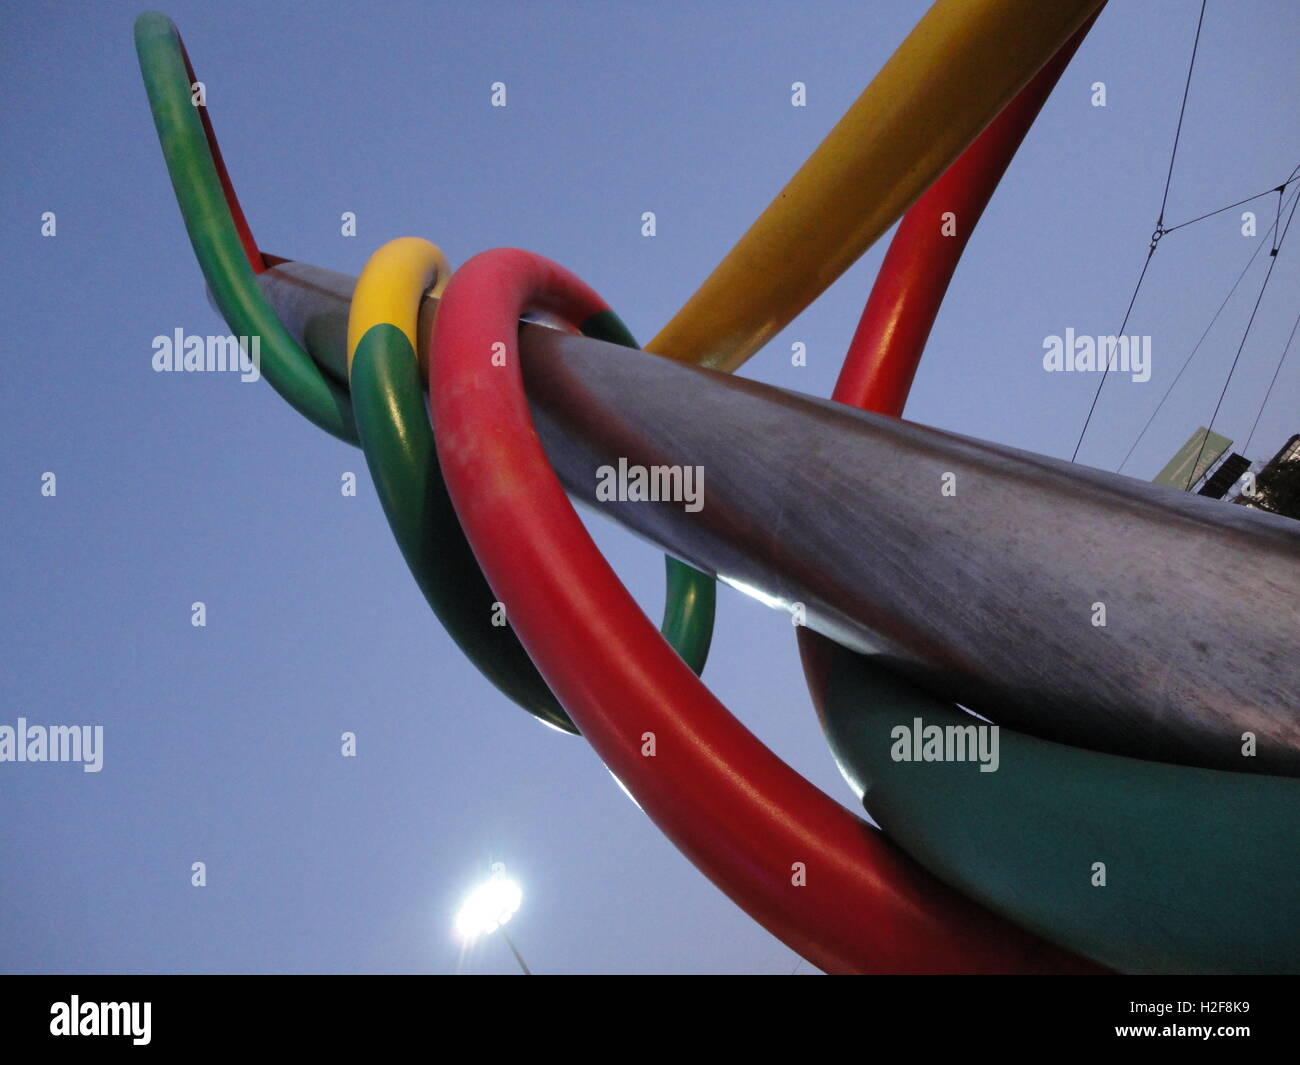 'Ago e filo' sculpture by the famous artist Claes Oldenburg, Cadorna Station, Milan, Italy Stock Photo